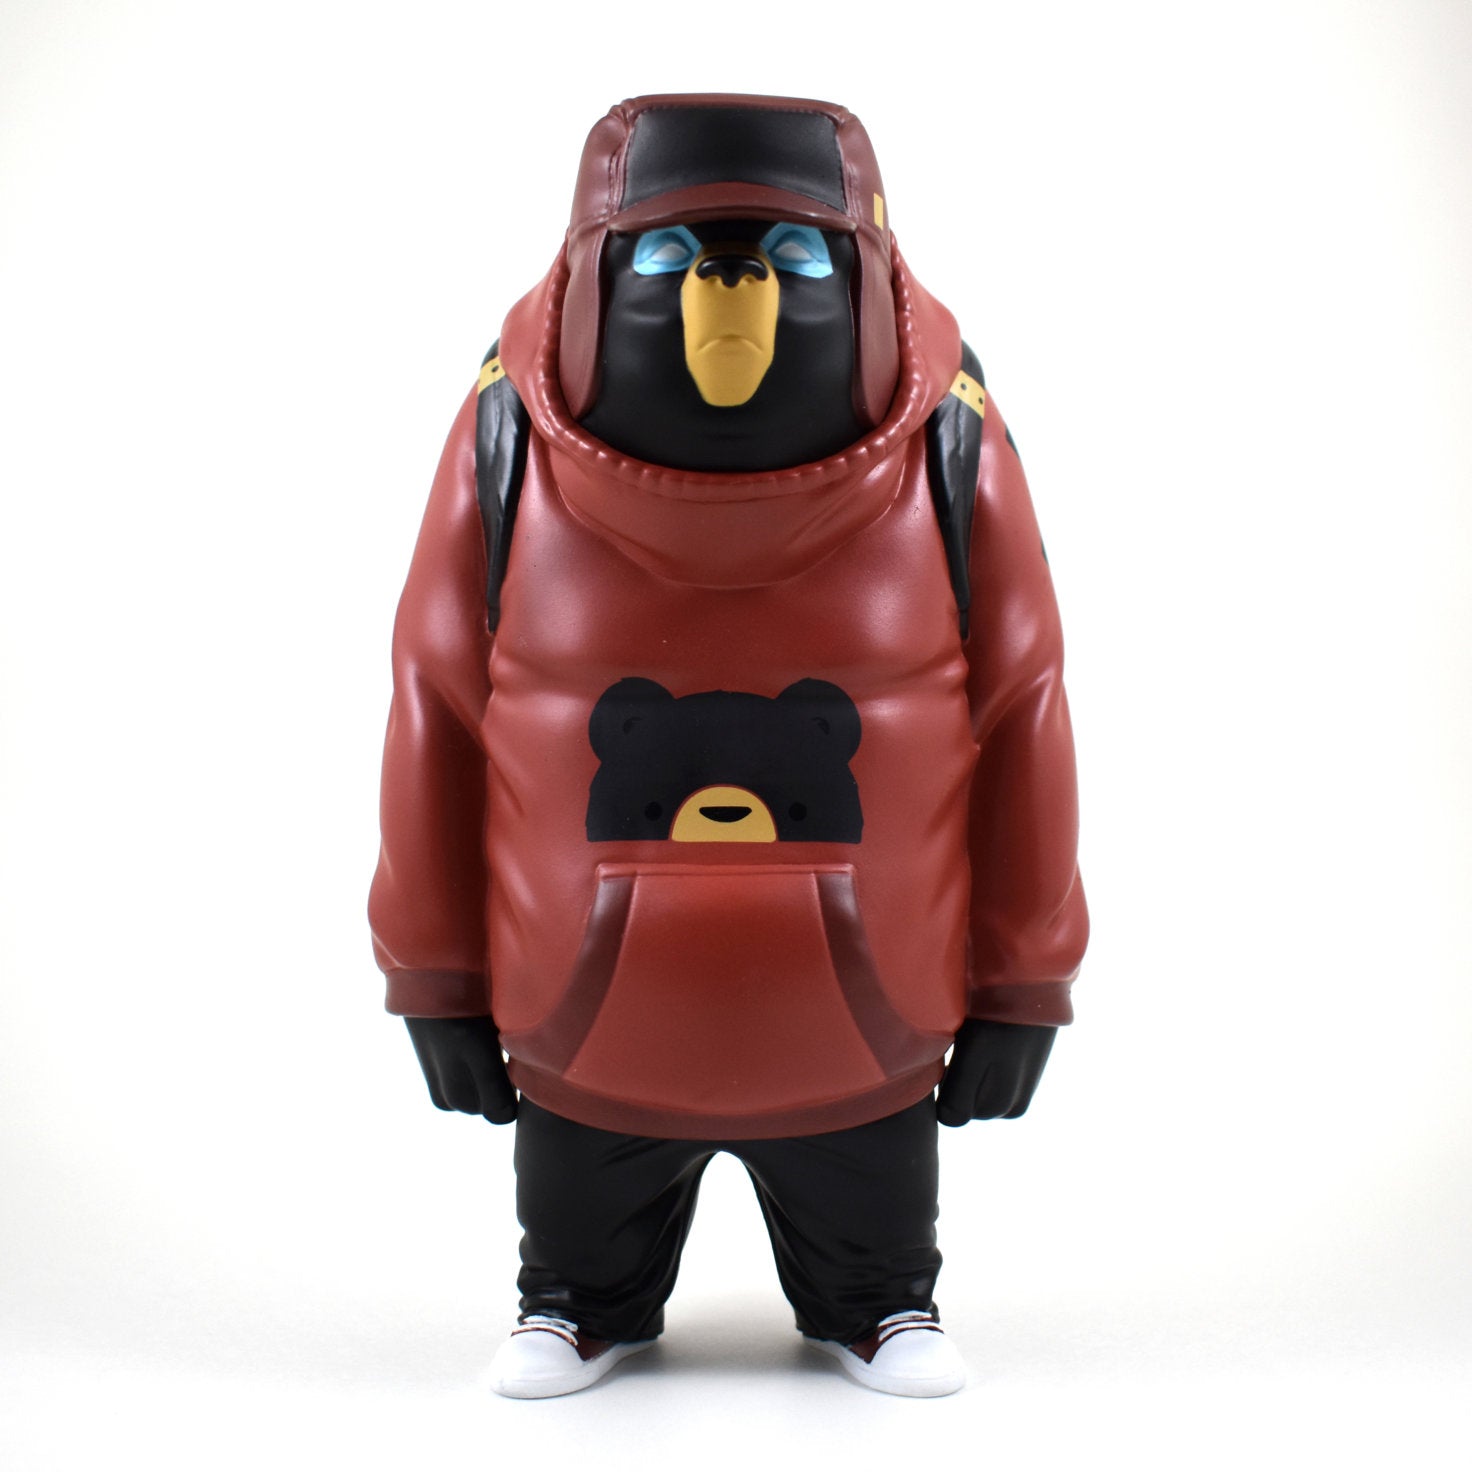 A toy bear in a red jacket, part of the Kub Brick Red Colorway by Mike Fudge vinyl figure collection.